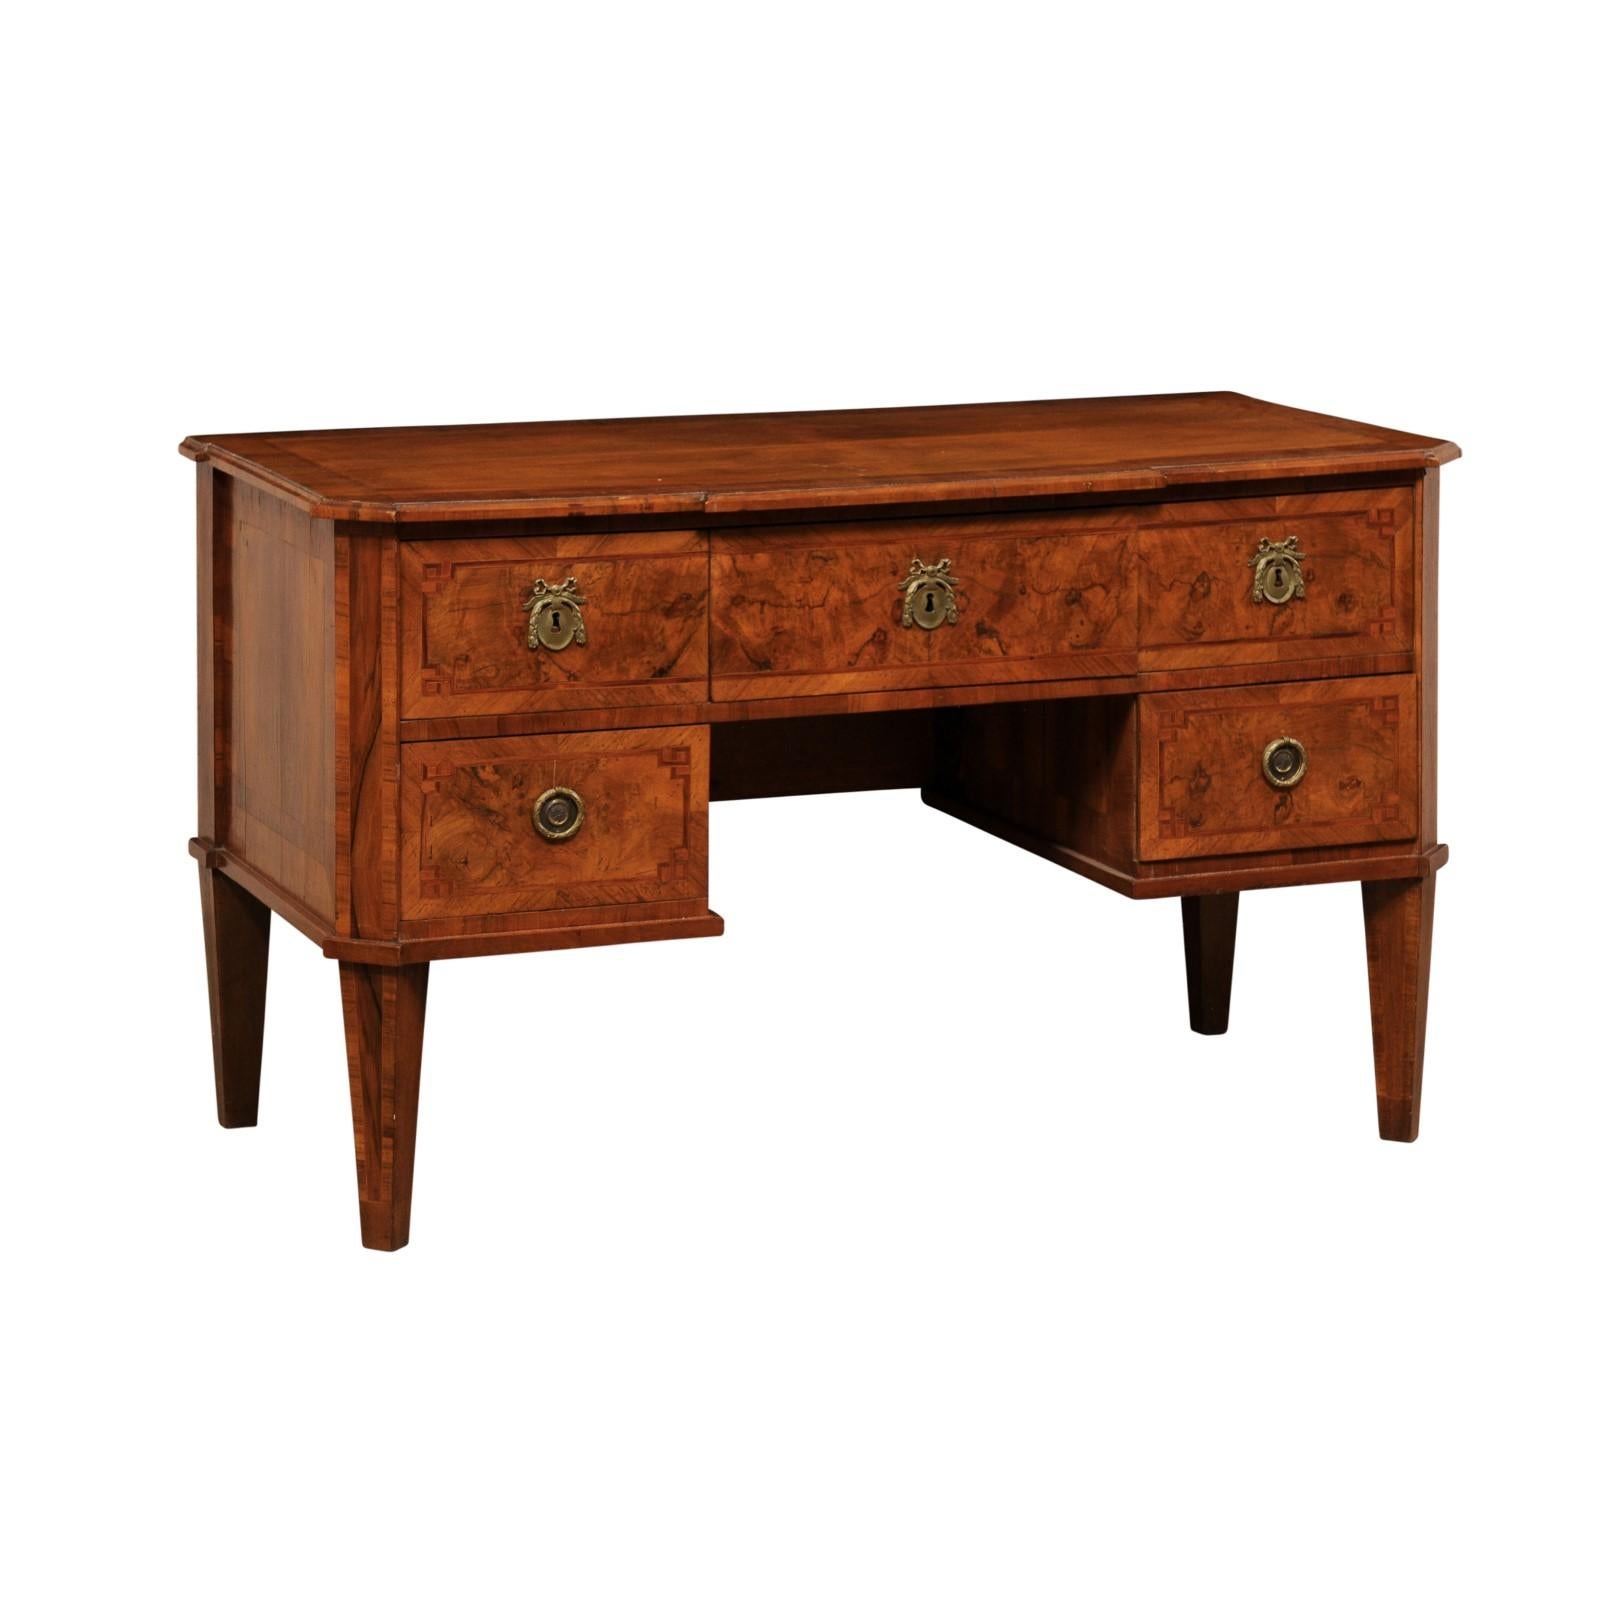 A Swedish Biedermeier birch veneered desk with drawers from the 19th century. This antique desk from Sweden, with it's beautiful birch wood grain veneer and decorative inlays, houses five-drawers (two stacked at either side and one at center),